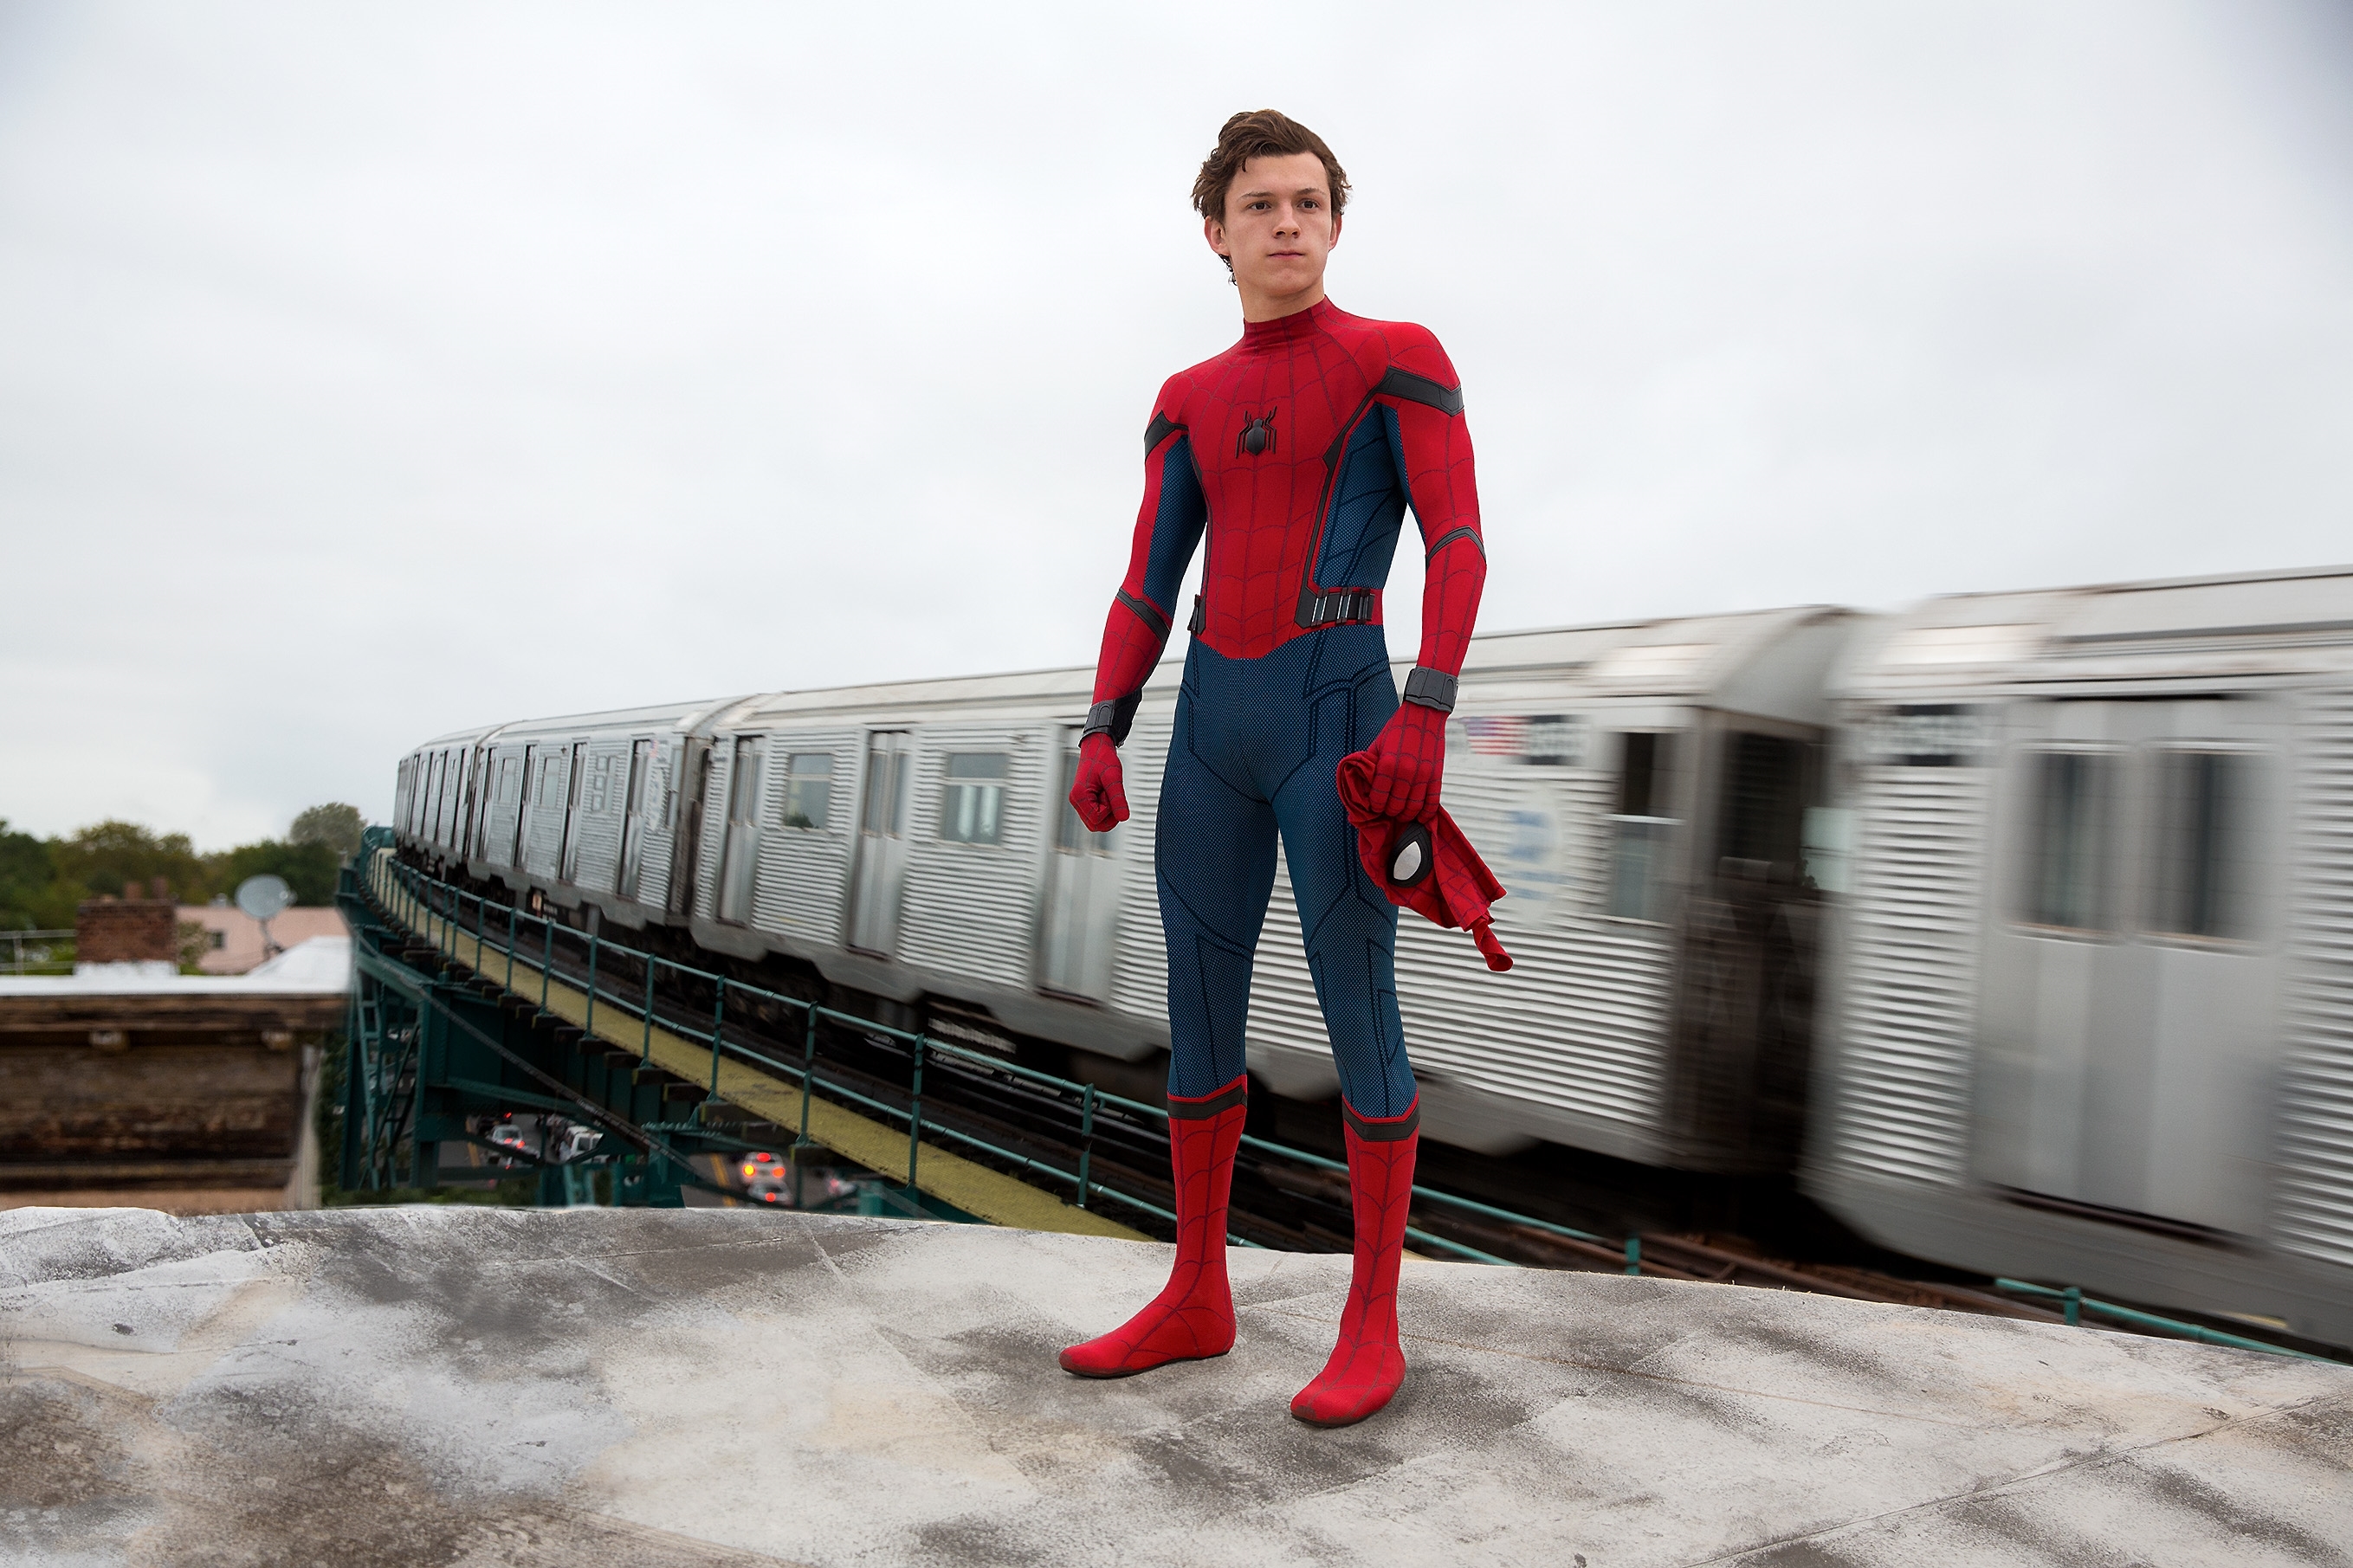 Image du film Spider-Man : Homecoming 9938be61-b563-4974-bc24-9f812a98ce54